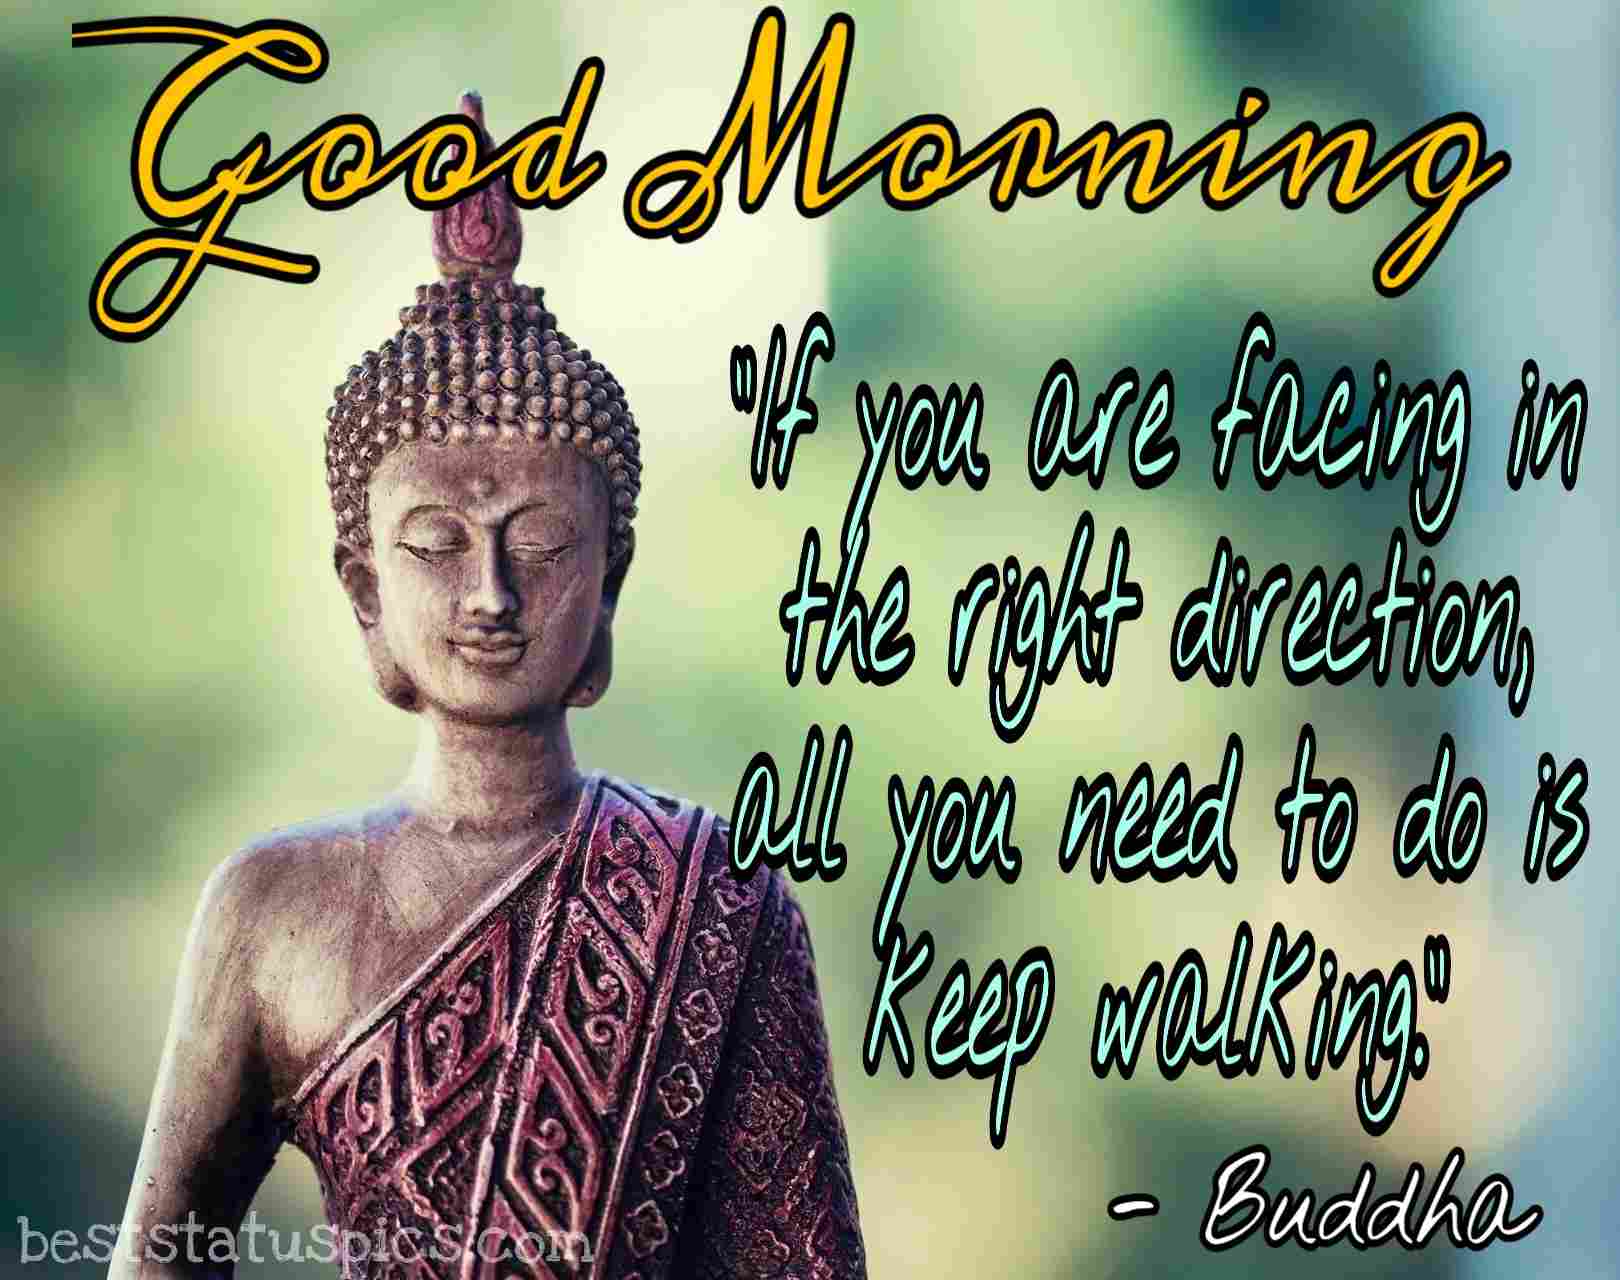 Good Morning Buddha Quotes And Images